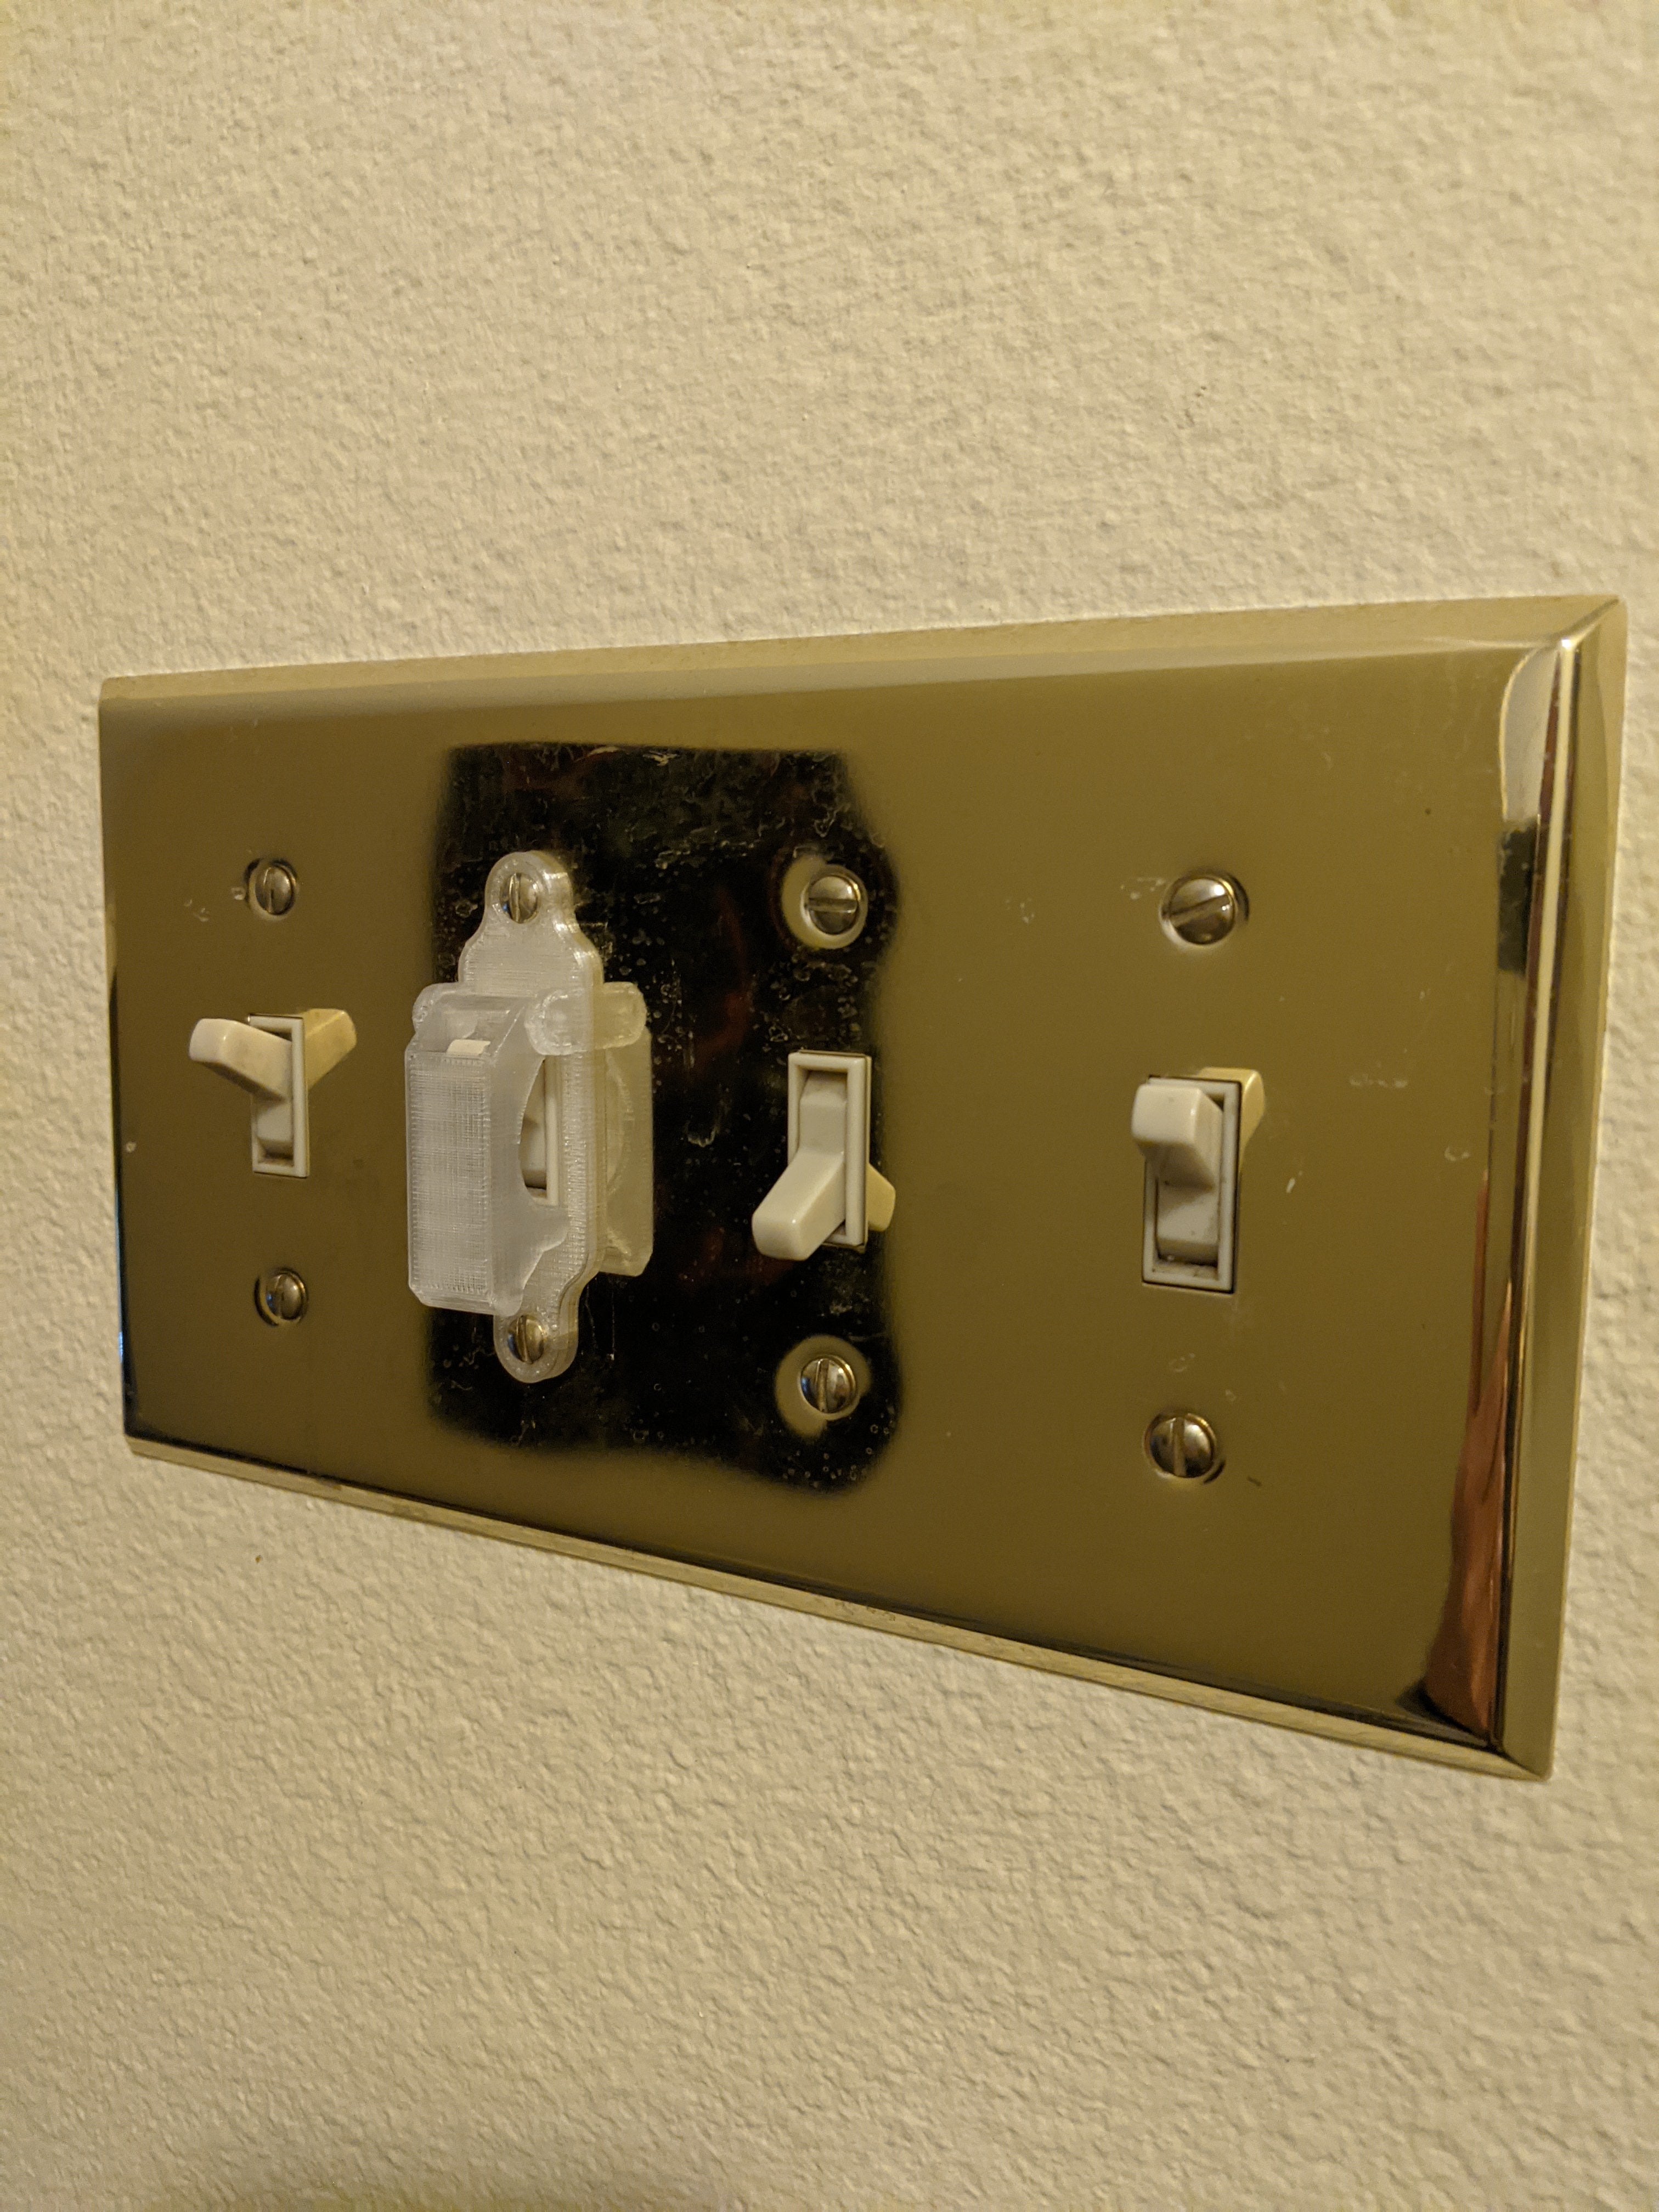 Home version light switch cover